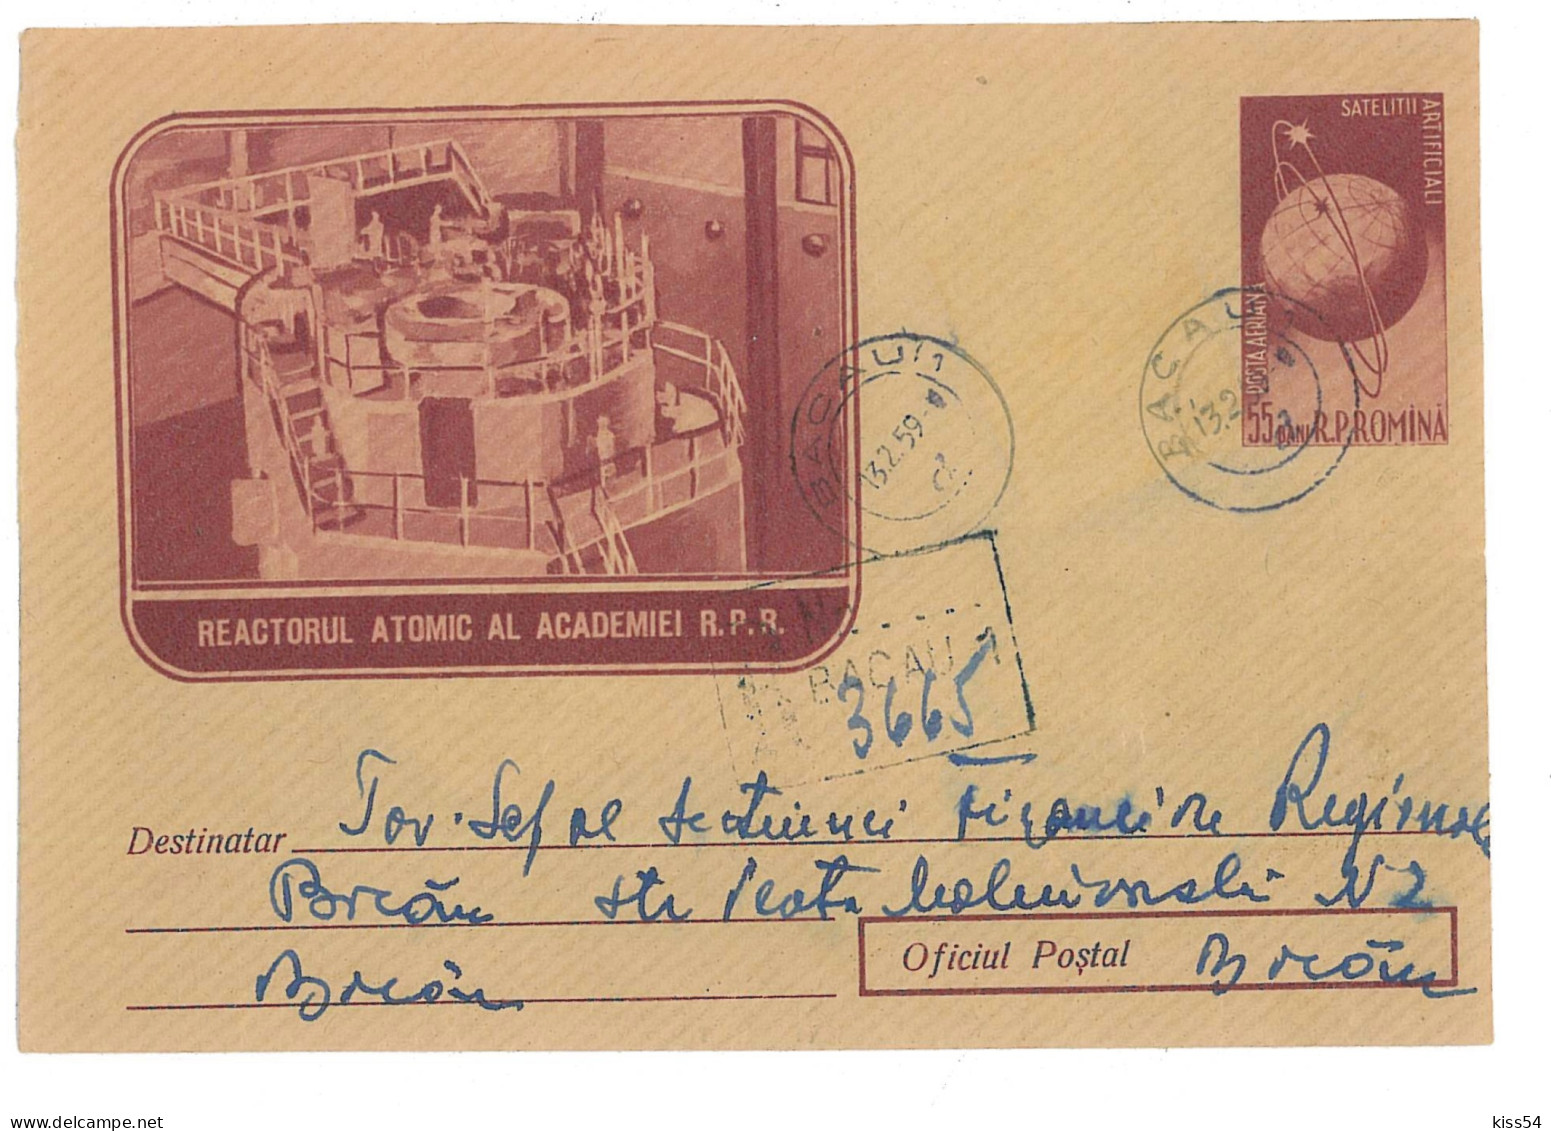 IP 58 A - 0119a-a ENERGY, Atomic Reactor, Romania - REGISTERED Stationery - Used - 1958 - Atomo